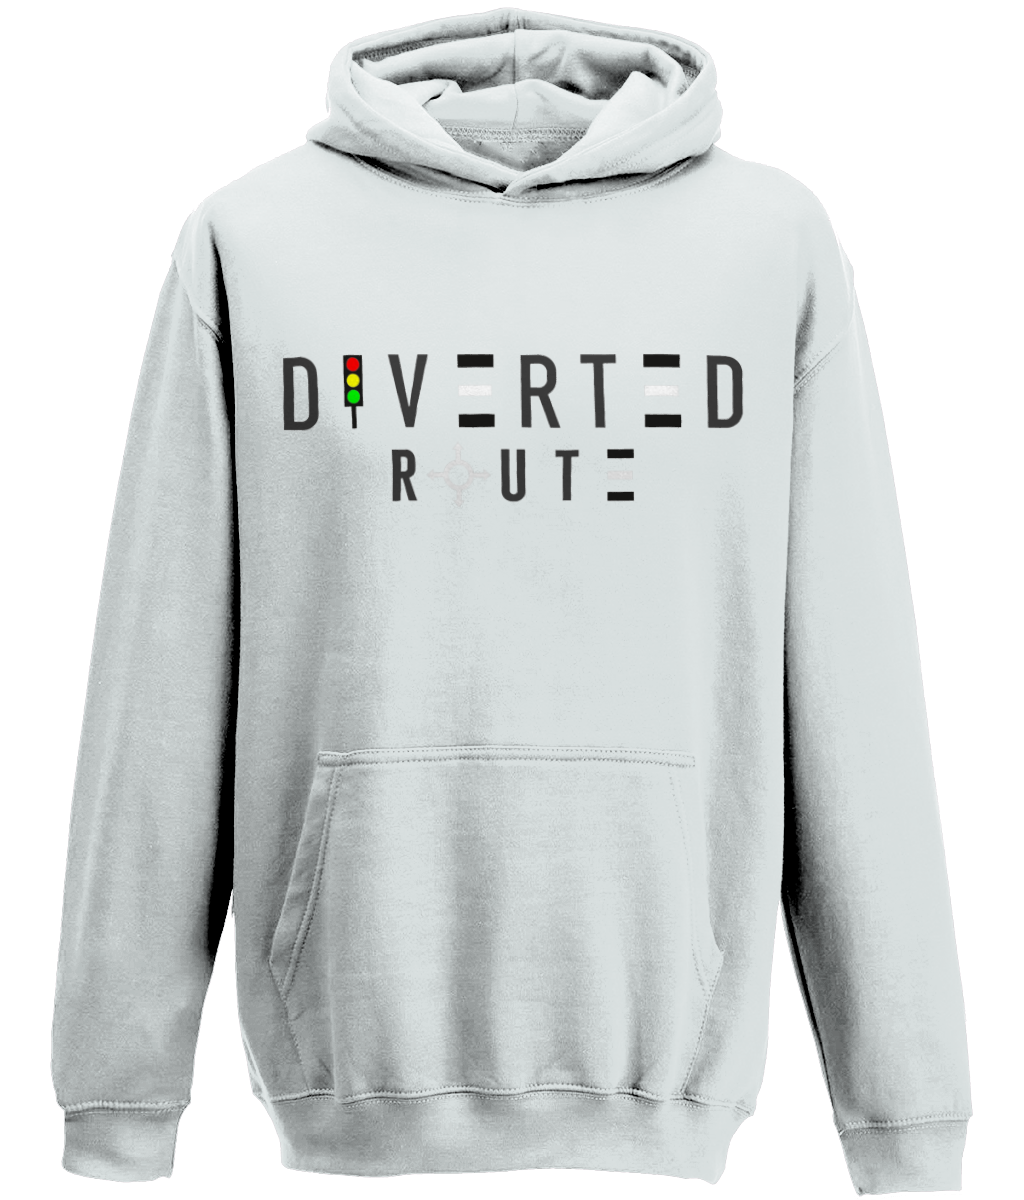 Diverted Route Roadsign Hoody